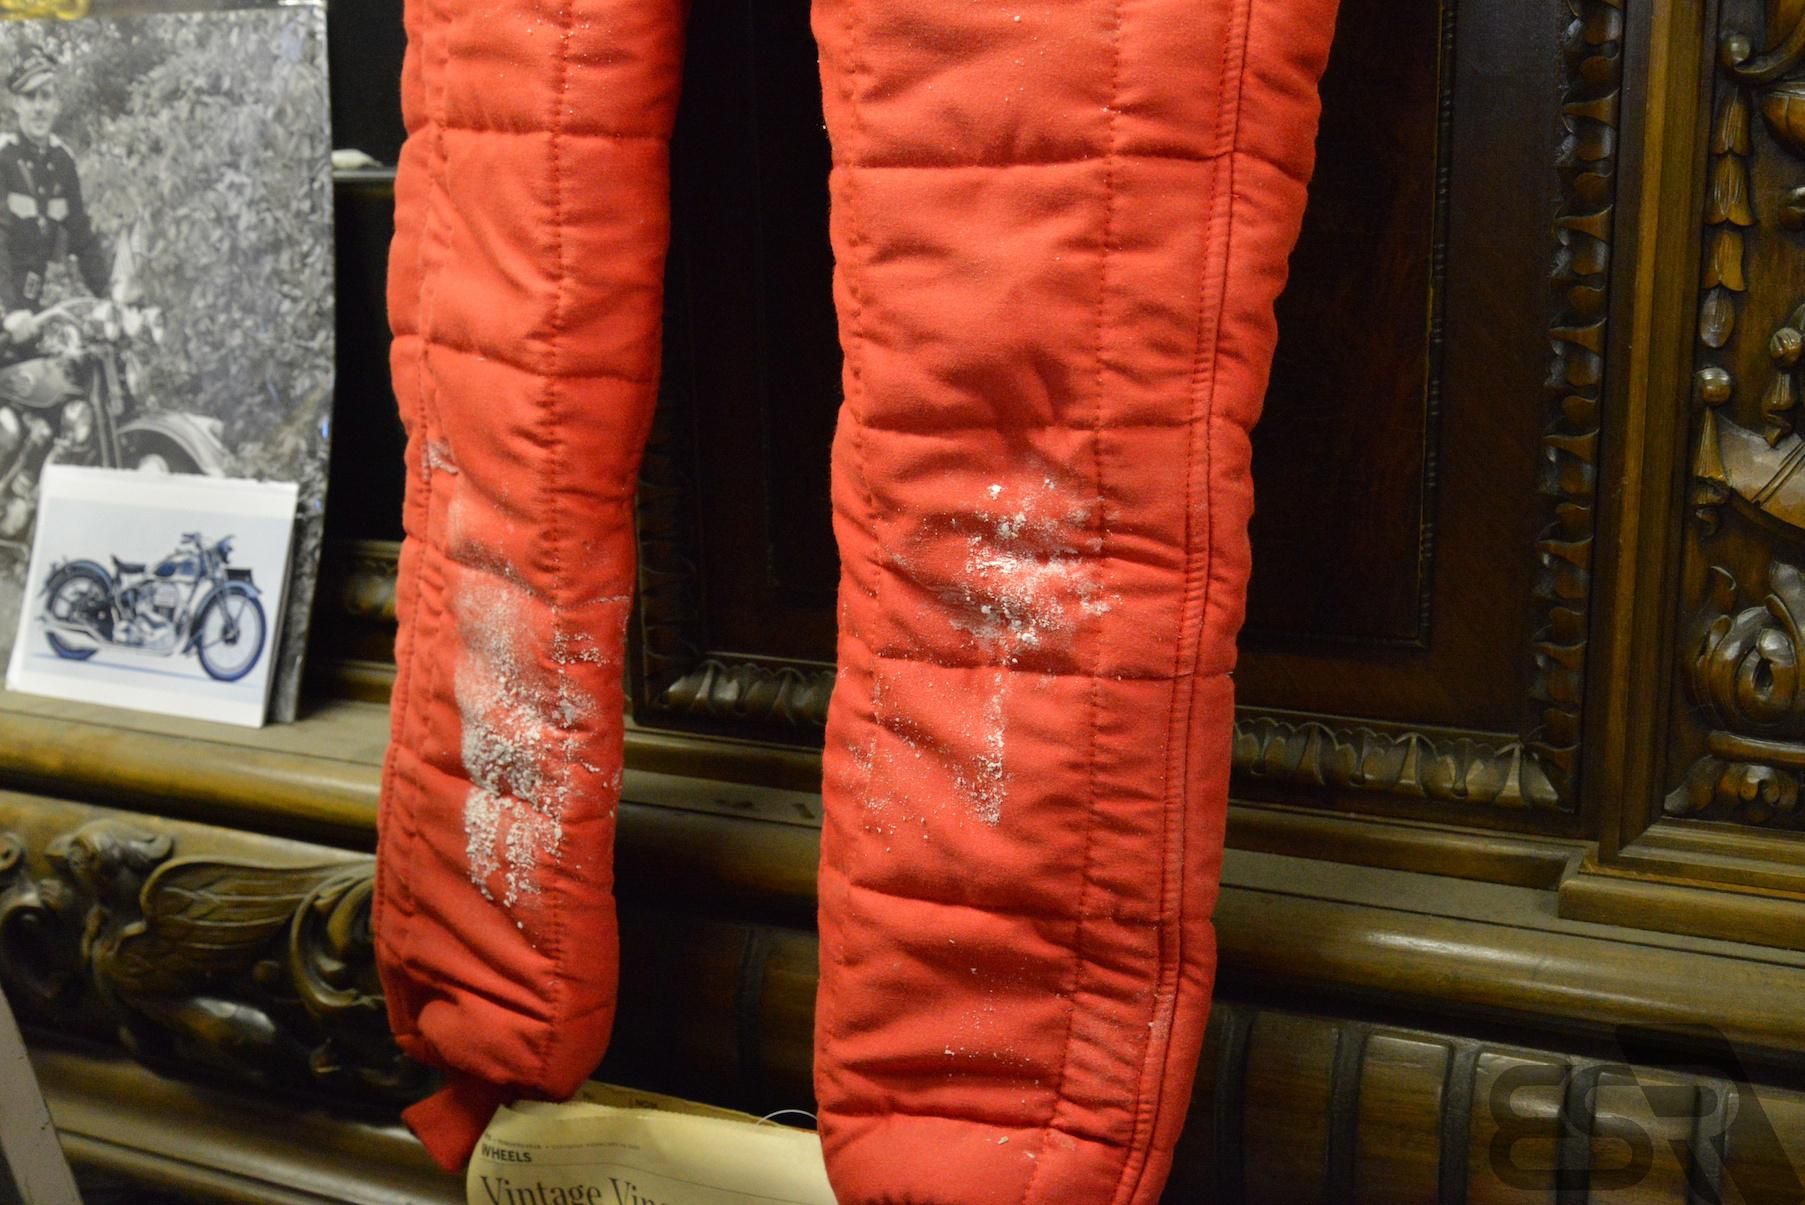 Salt stains from the flats in Bonneville still decorate Bar's fire suit